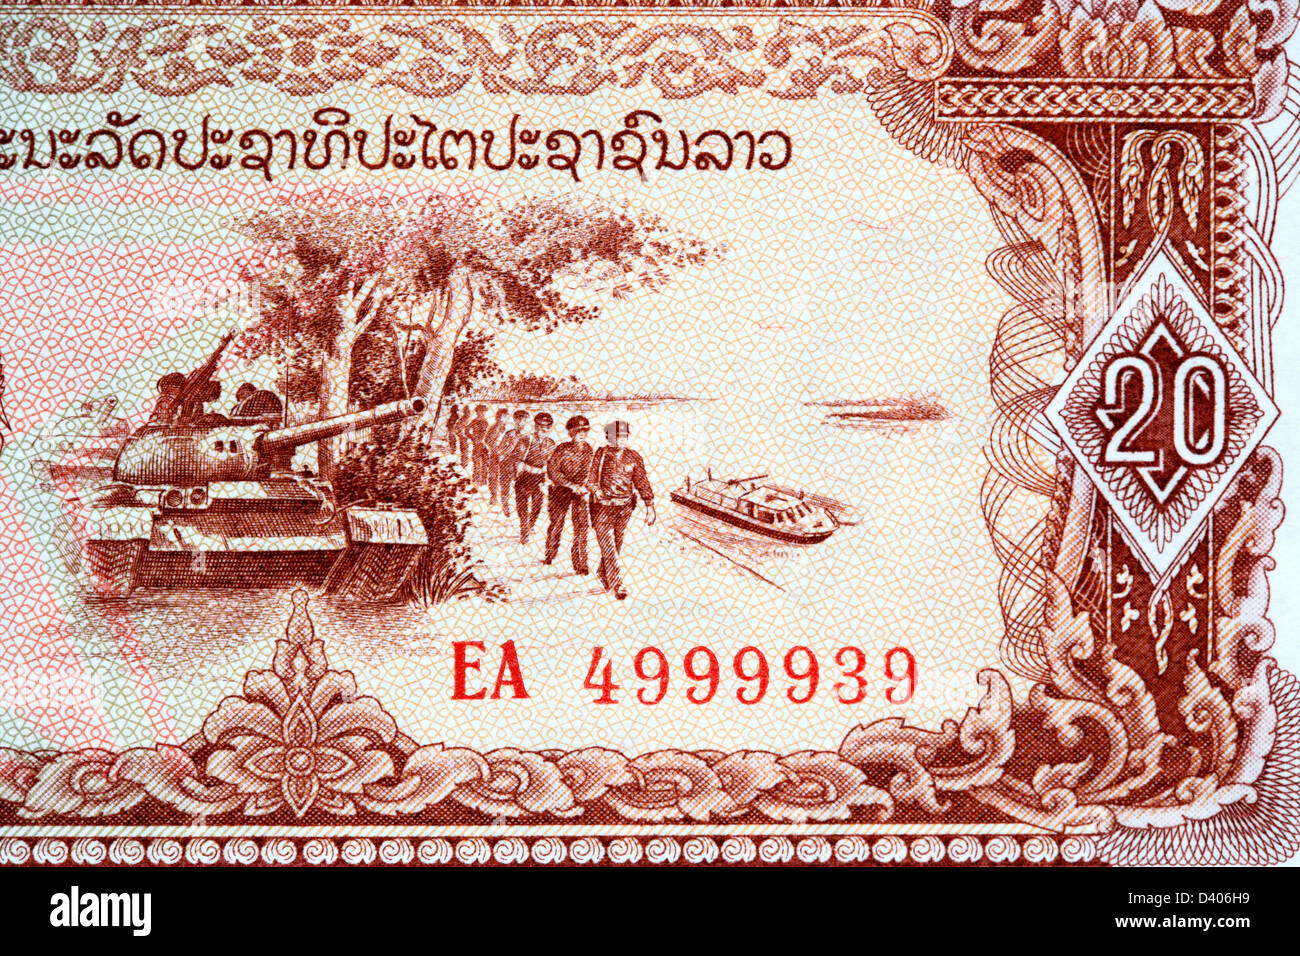 Tank and soldiers from 20 Kip banknote, Laos, 1979 Stock Photo